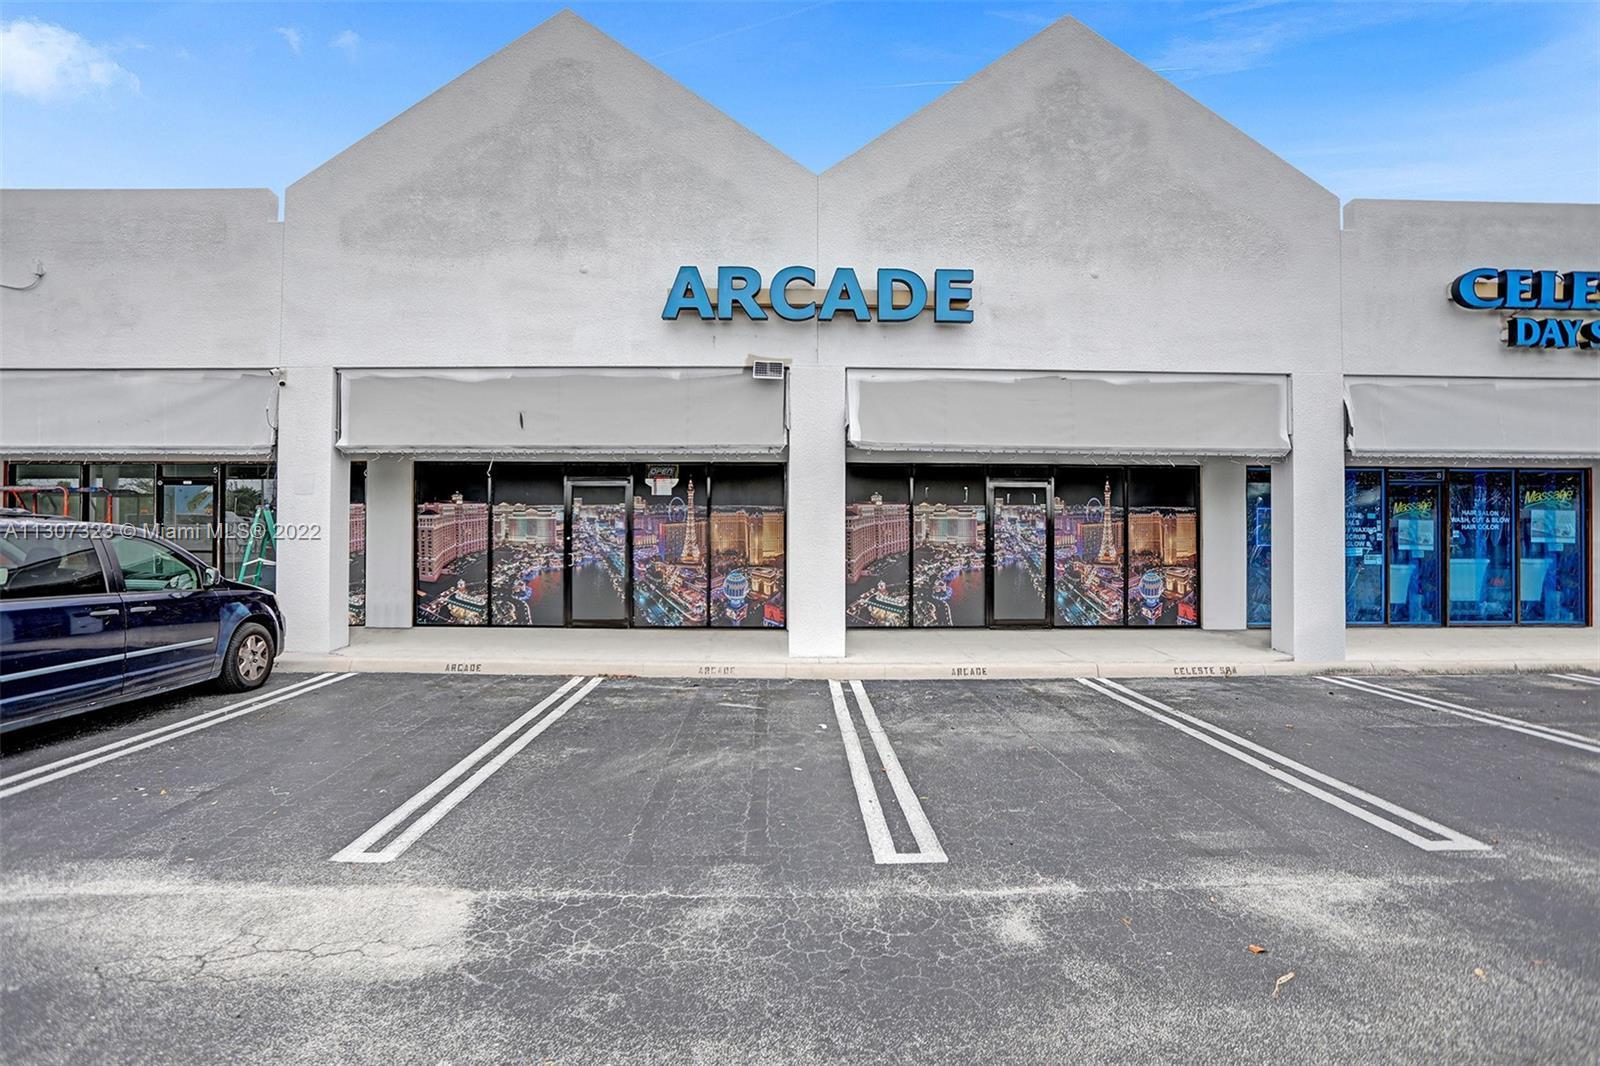 Newly renovated 2,400 sqft Arcade Business for sale. Already established with great clientele and on